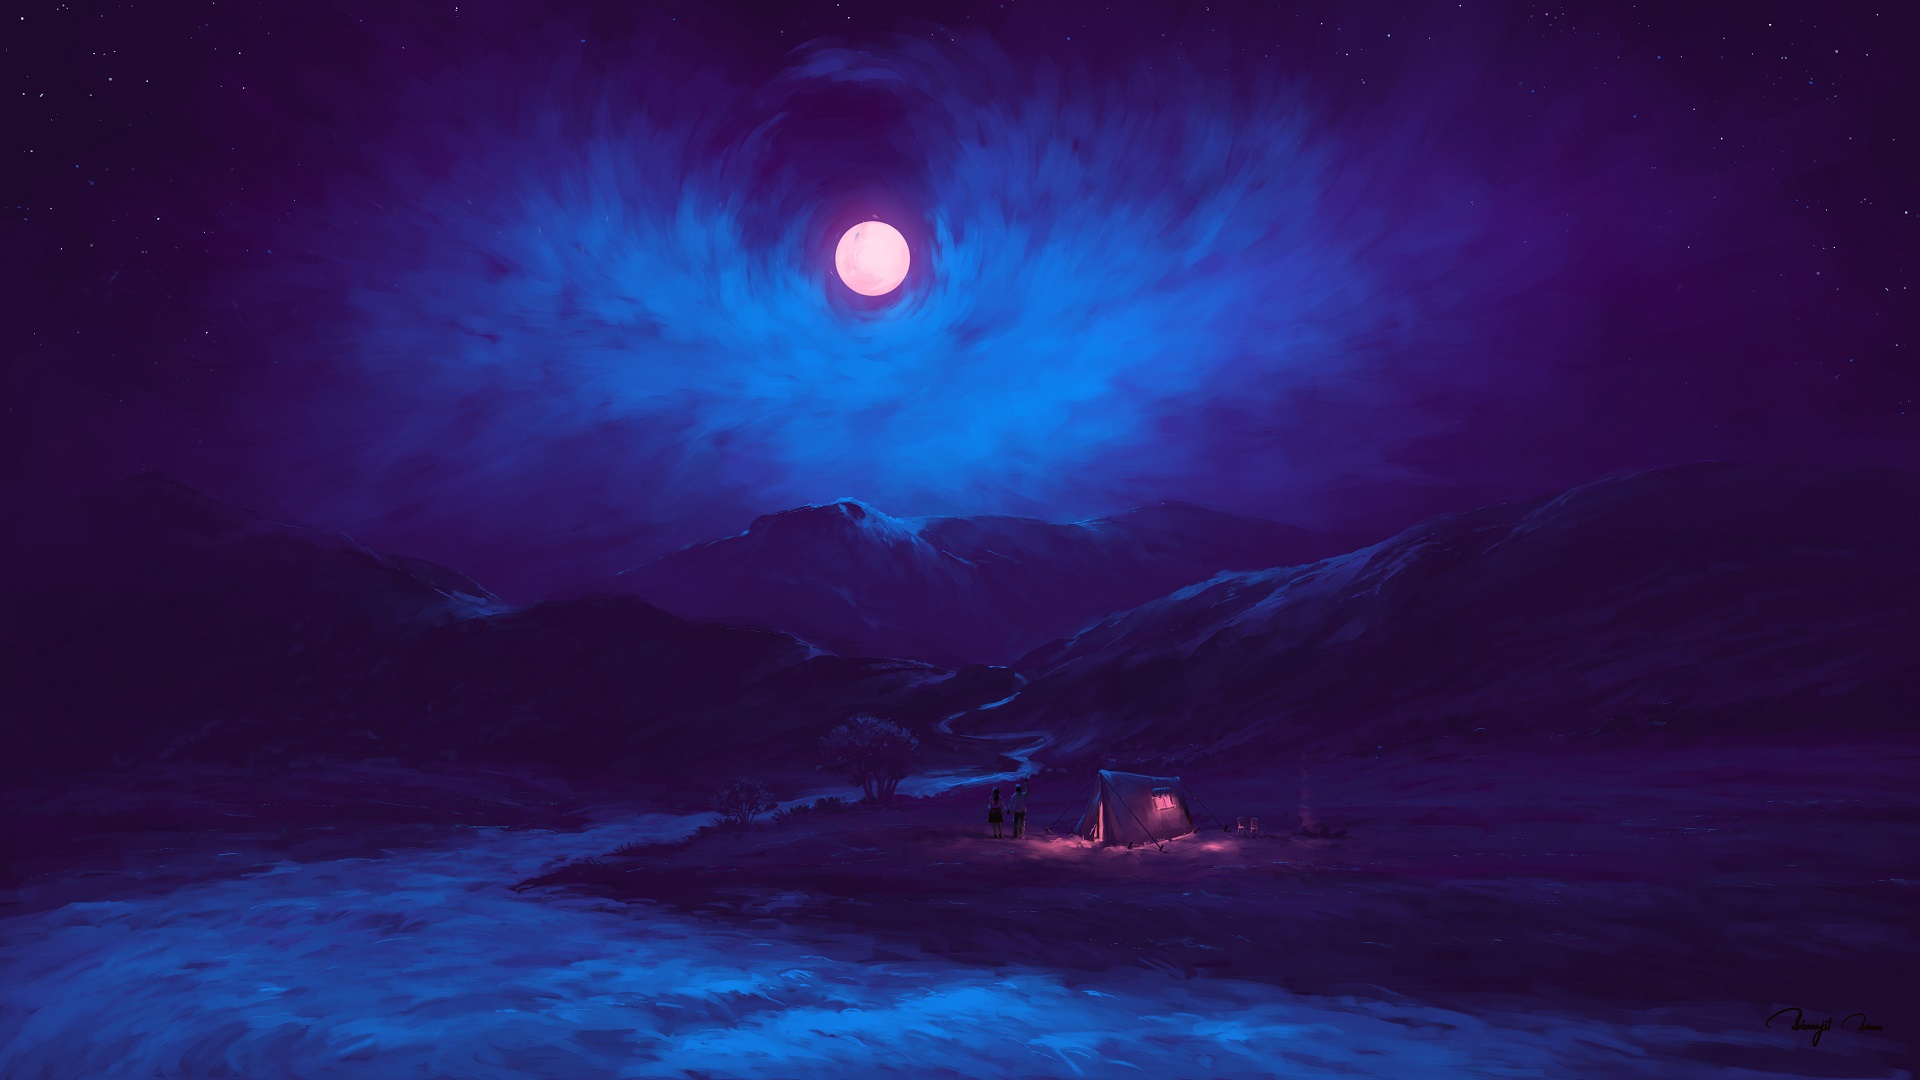 Digital Painting Landscape Night Clouds Moon River Mountains Couple Camp Romantic BisBiswas 1920x1080